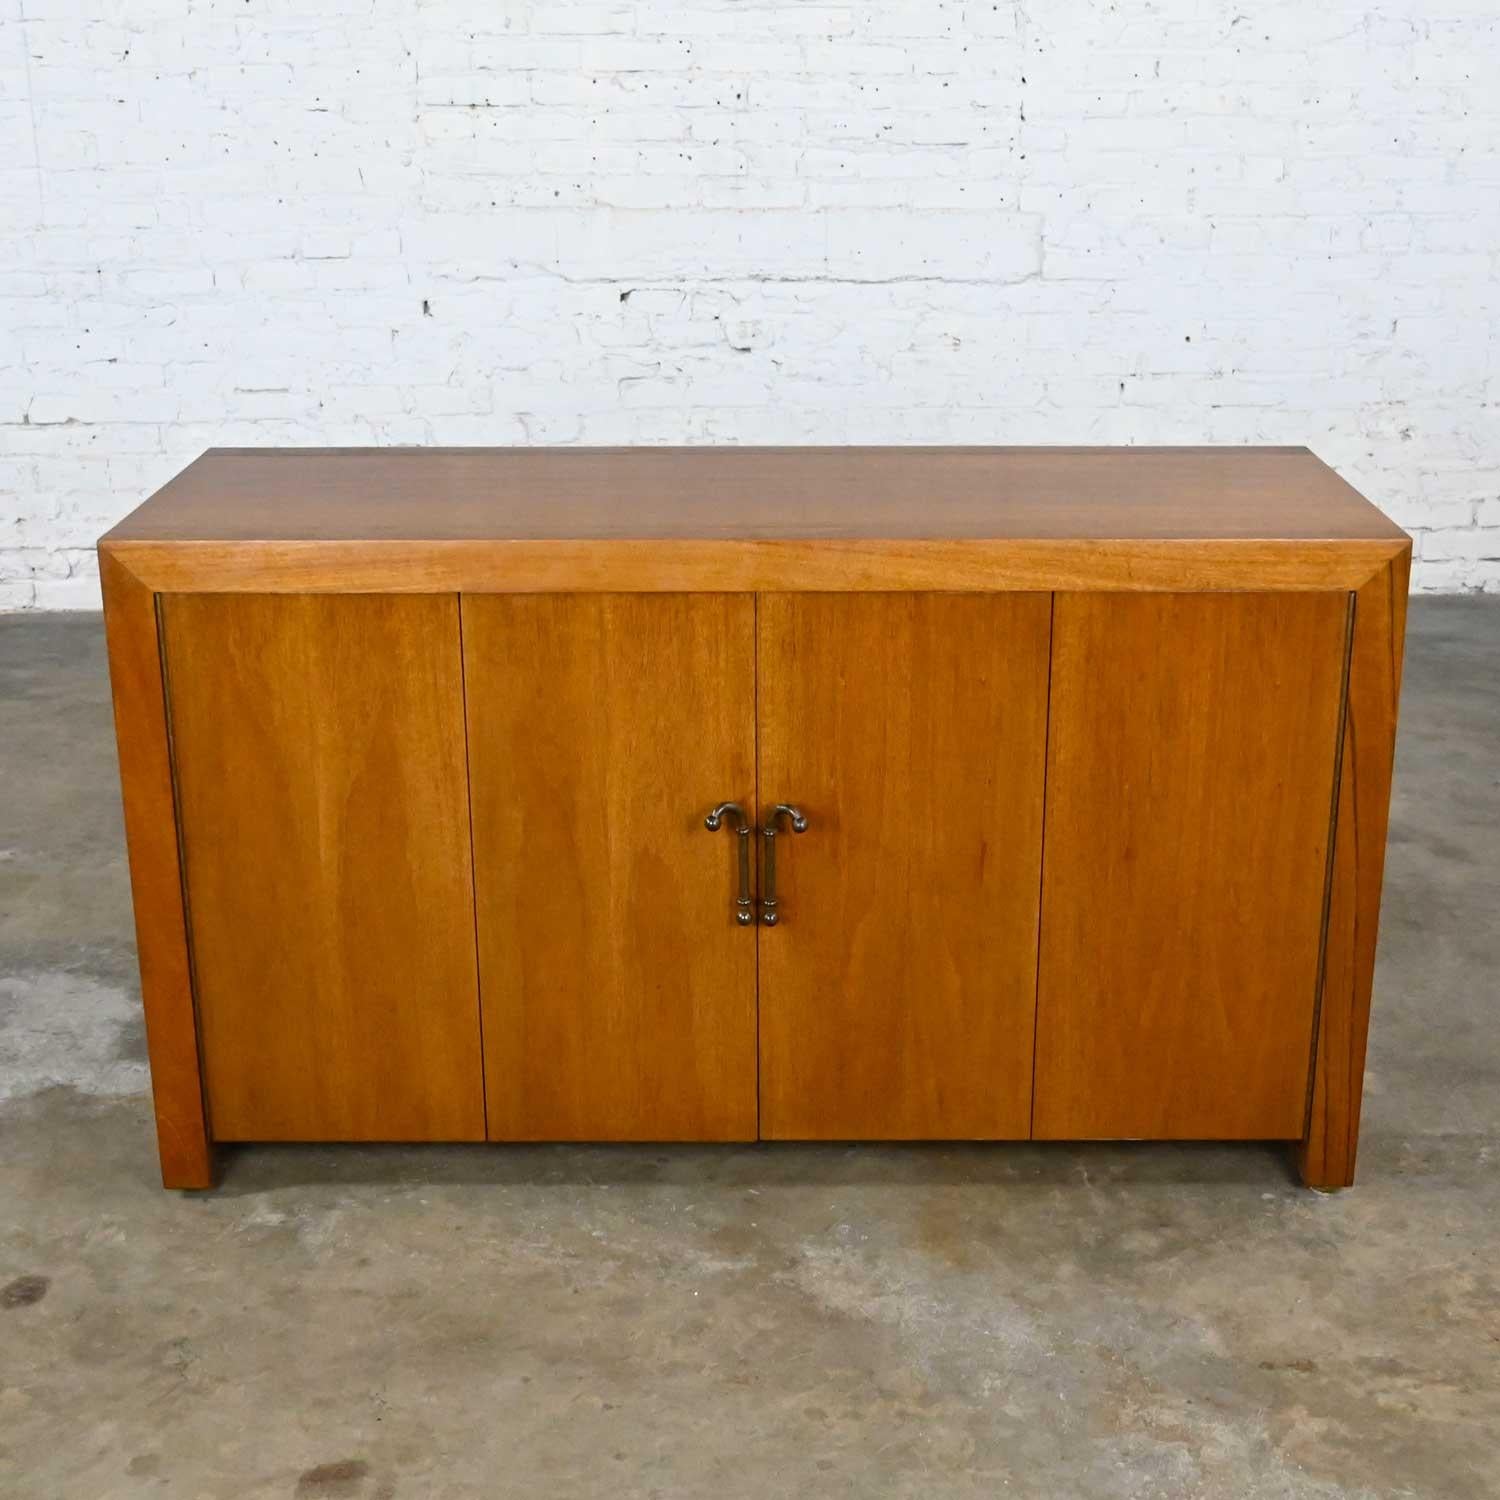 Fabulous Mid-Century Modern to Modern narrow walnut buffet console cabinet with bi-fold doors, 1 adjustable shelf, and antiqued brass handles. Beautiful condition, keeping in mind that this is vintage and not new so will have signs of use and wear.